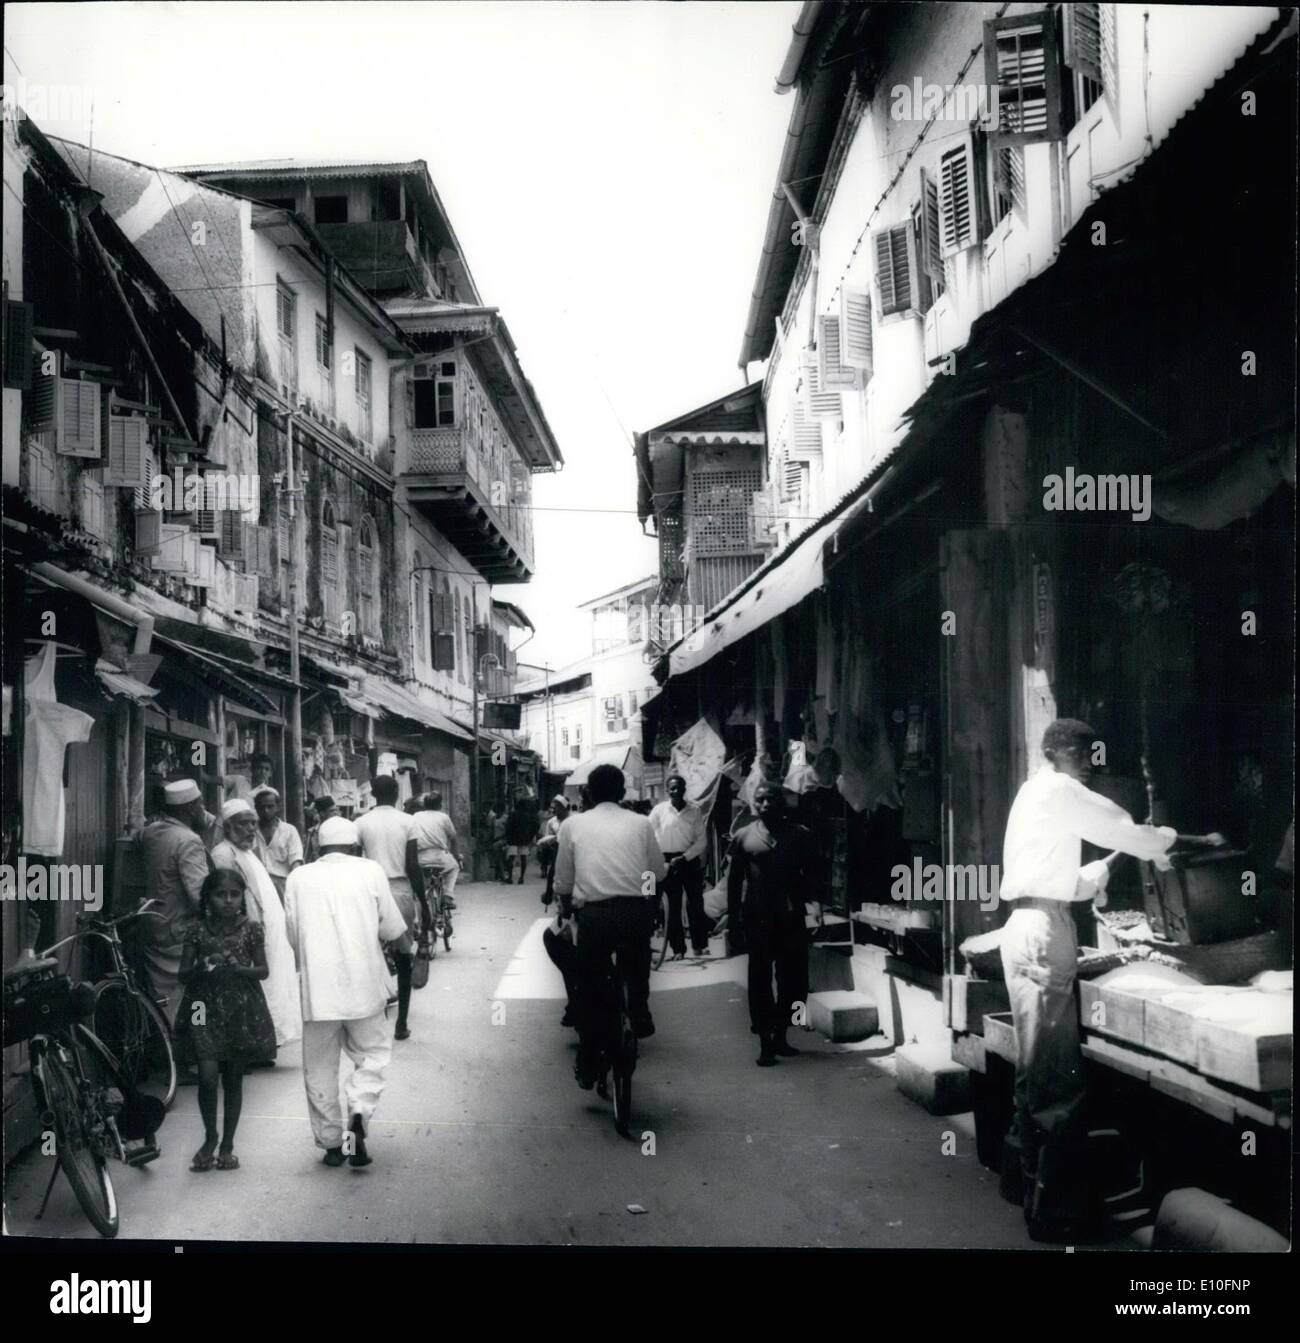 Oct. 10, 1972 - Tanzania-Zanzibar: Six months after the assassination of the spice island's despot Sheikh Abeid Karume, many changes for the better become visible. Food rationing is a matter of the past, new projects are developing, tourists are hoped for. Photo shows Zanzibar's historical old section has great potentials for tourism. Stock Photo